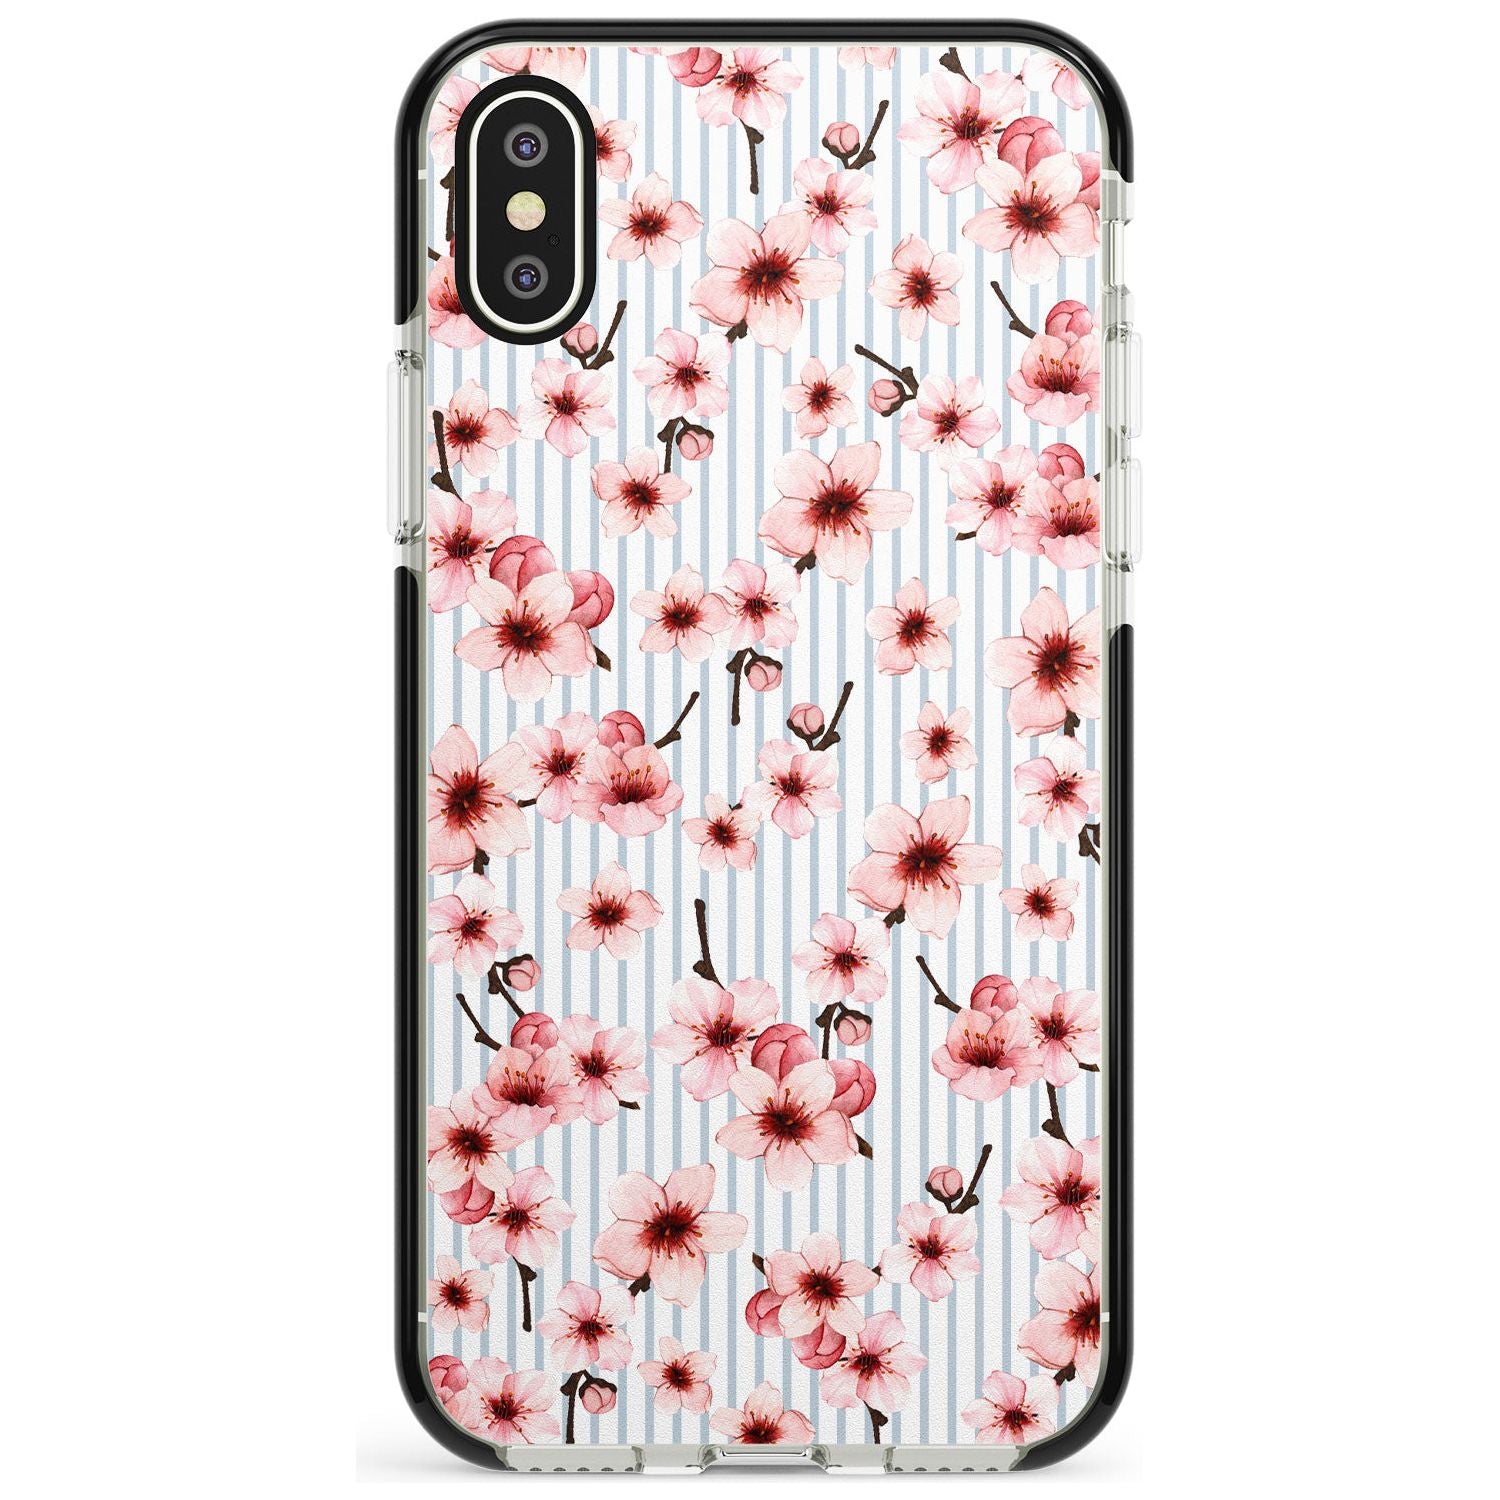 Cherry Blossoms on Blue Stripes Pattern Black Impact Phone Case for iPhone X XS Max XR